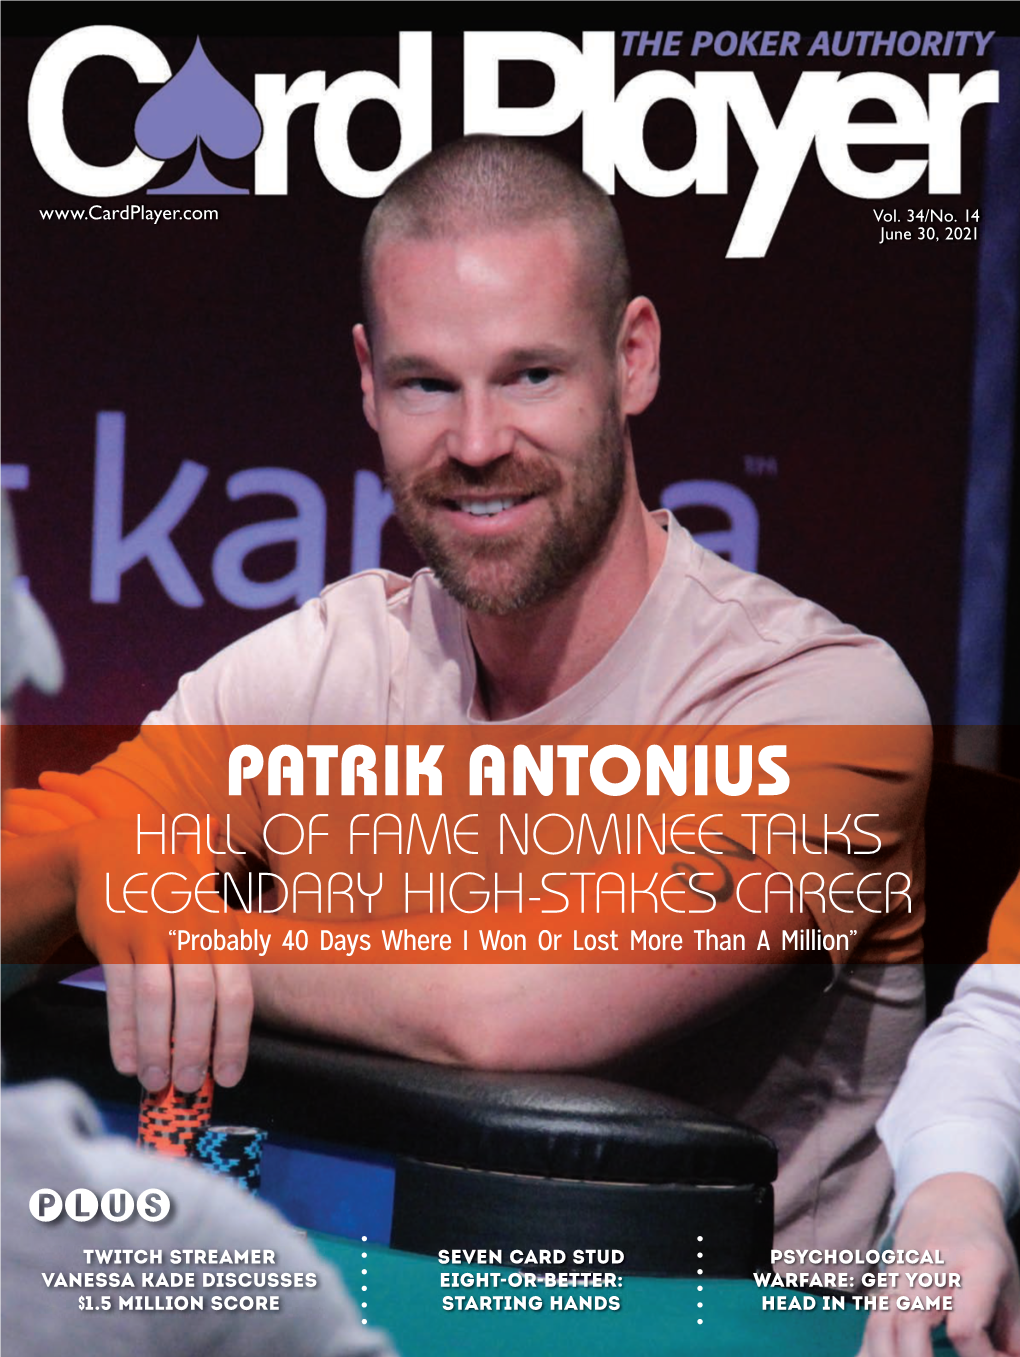 PATRIK ANTONIUS HALL of FAME NOMINEE TALKS LEGENDARY HIGH-STAKES CAREER “Probably 40 Days Where I Won Or Lost More Than a Million”